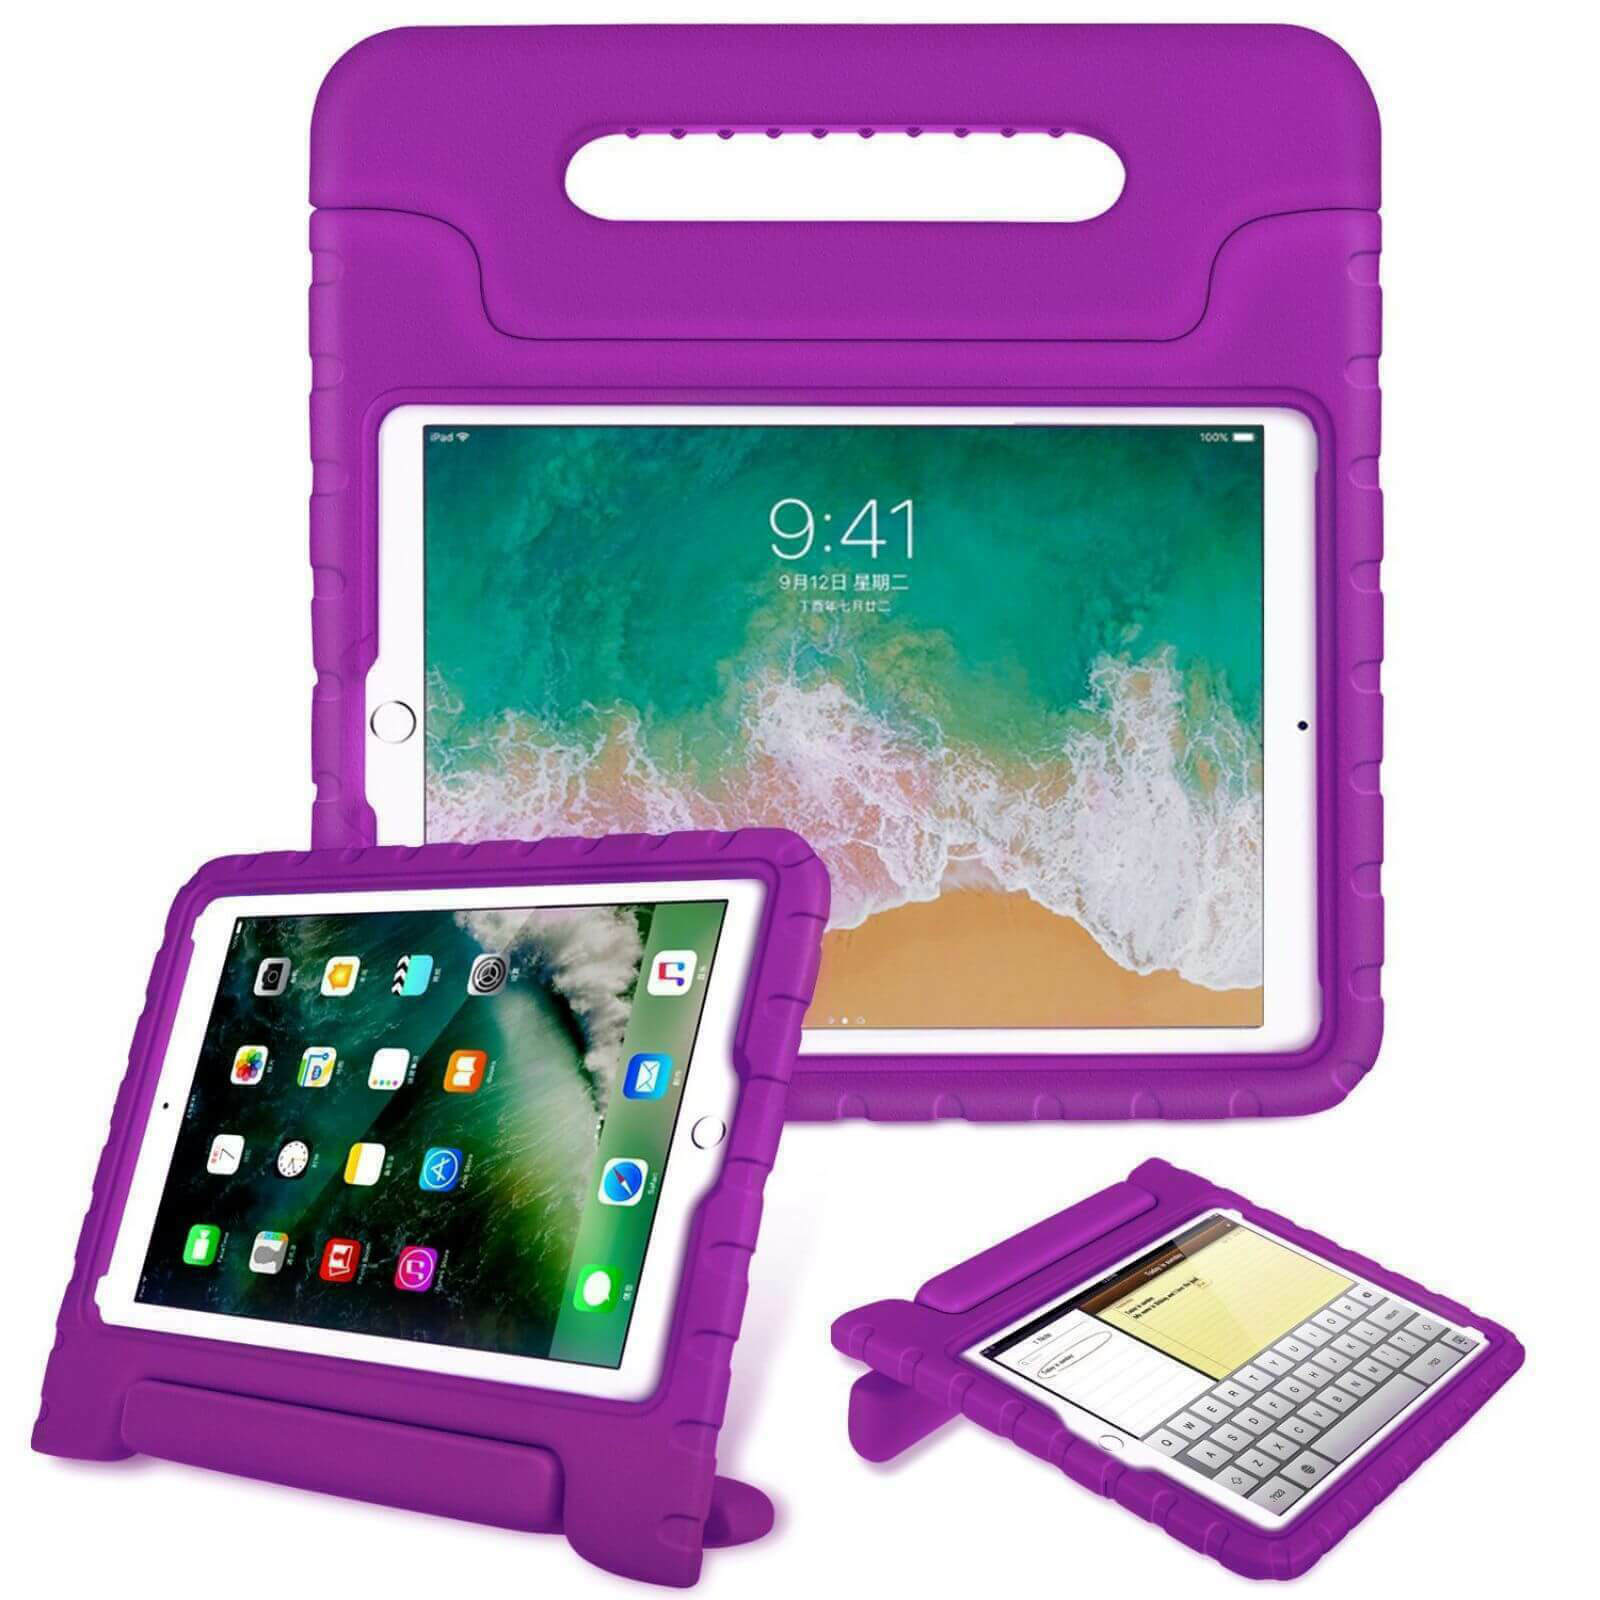 For Apple iPad Mini 4 5 Kids Case Shockproof Cover With Stand Purple